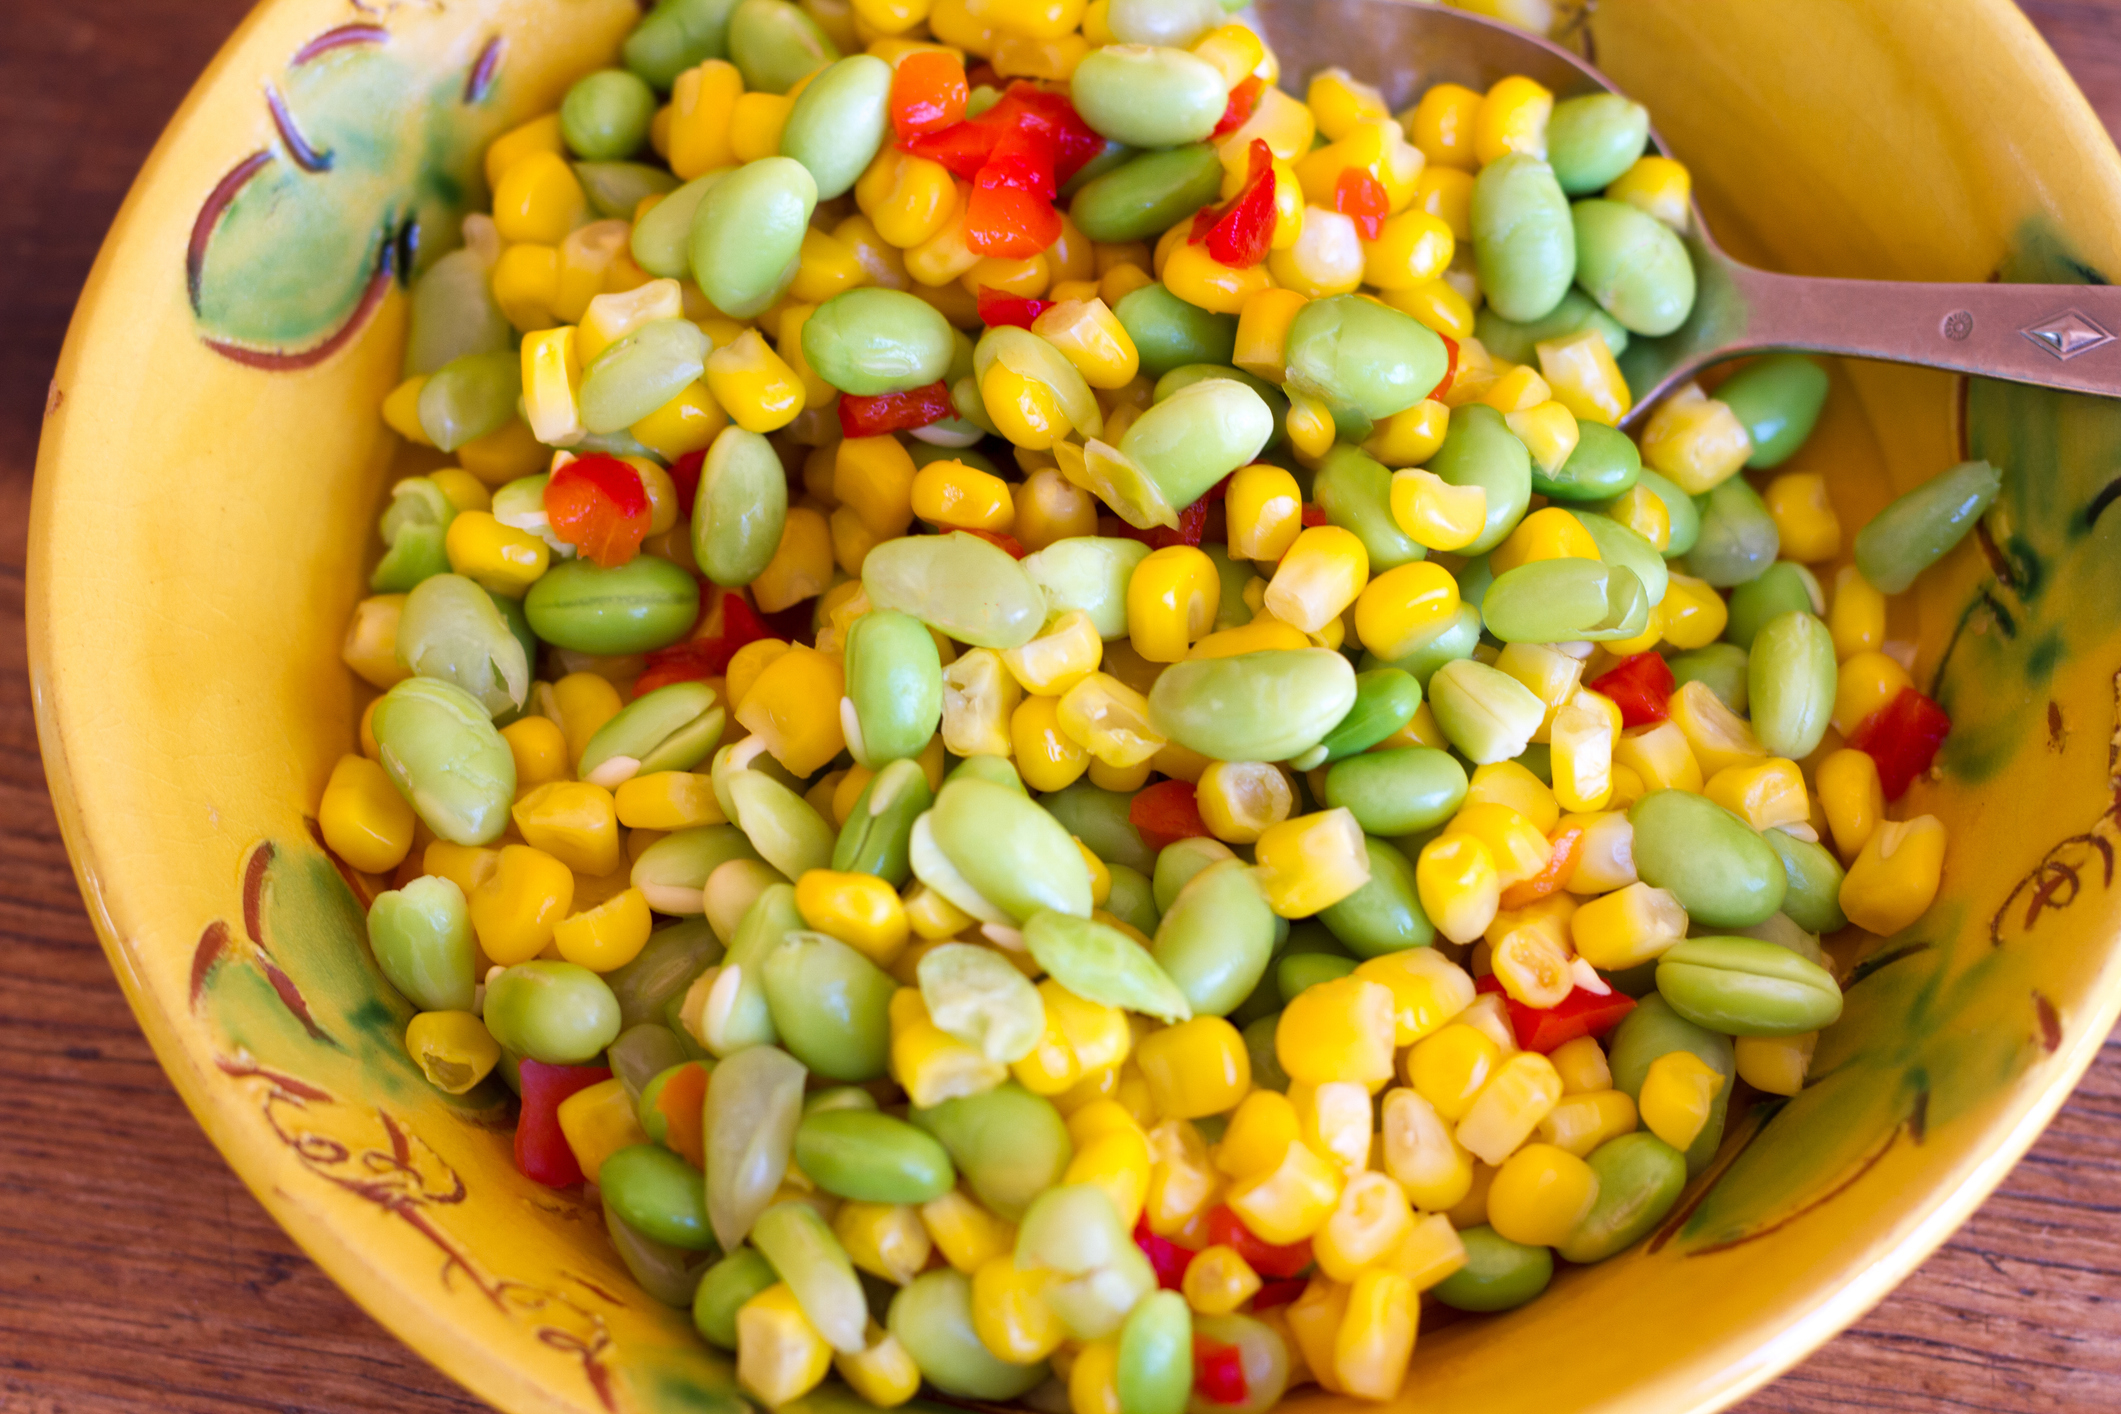 A close-up of a bowl filled with a mixed vegetable salad containing corn, edamame, and red bell peppers, with a serving spoon in the bowl